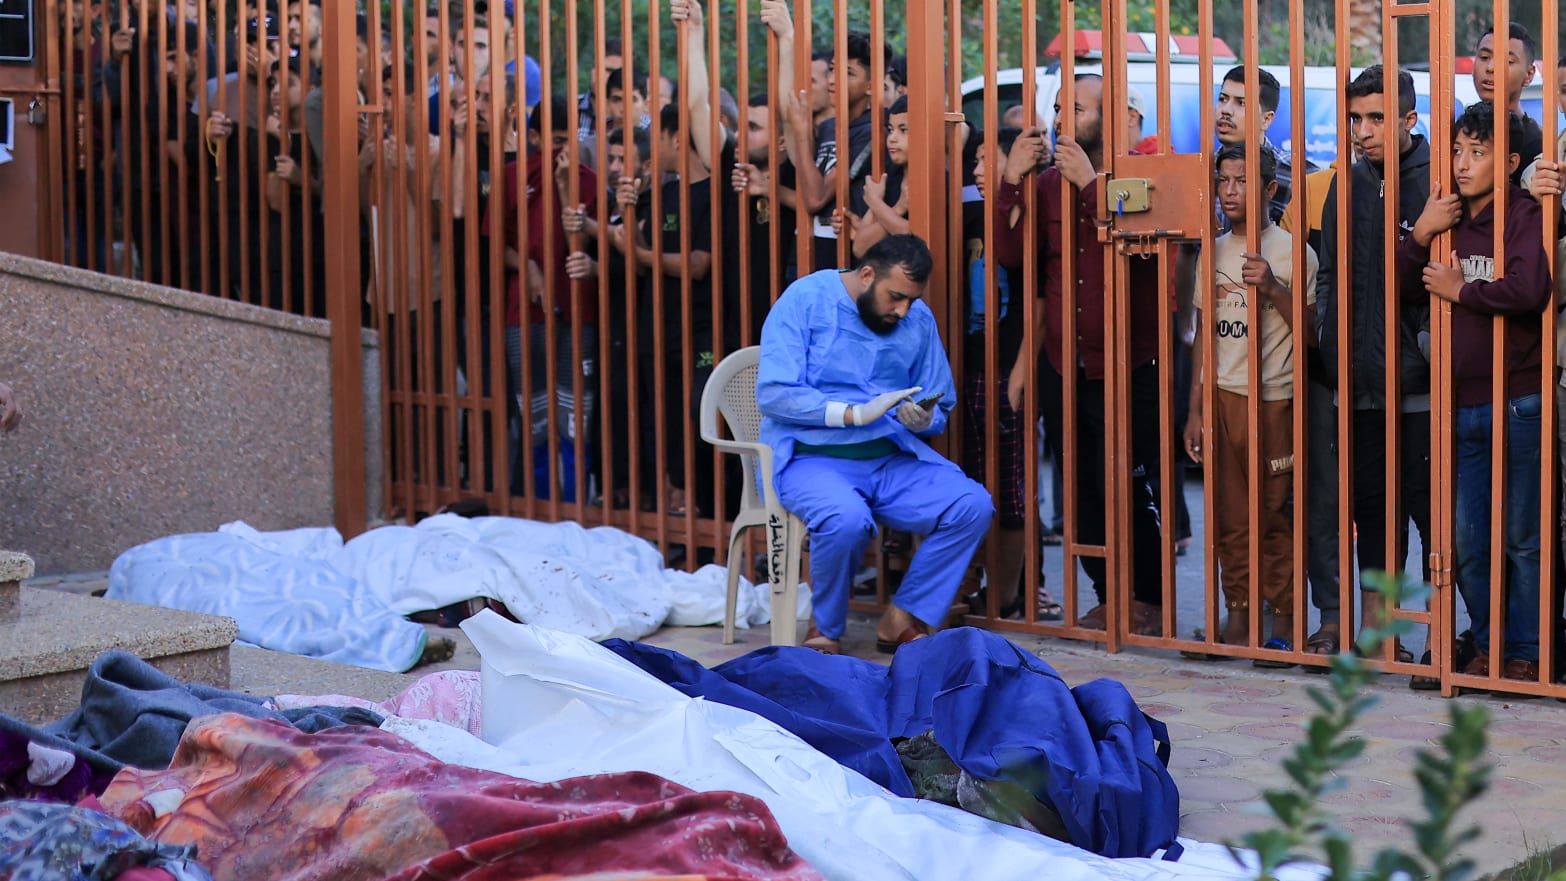 A medical worker sitting among bodies covered in white shrouds, with people looking over through a gate.